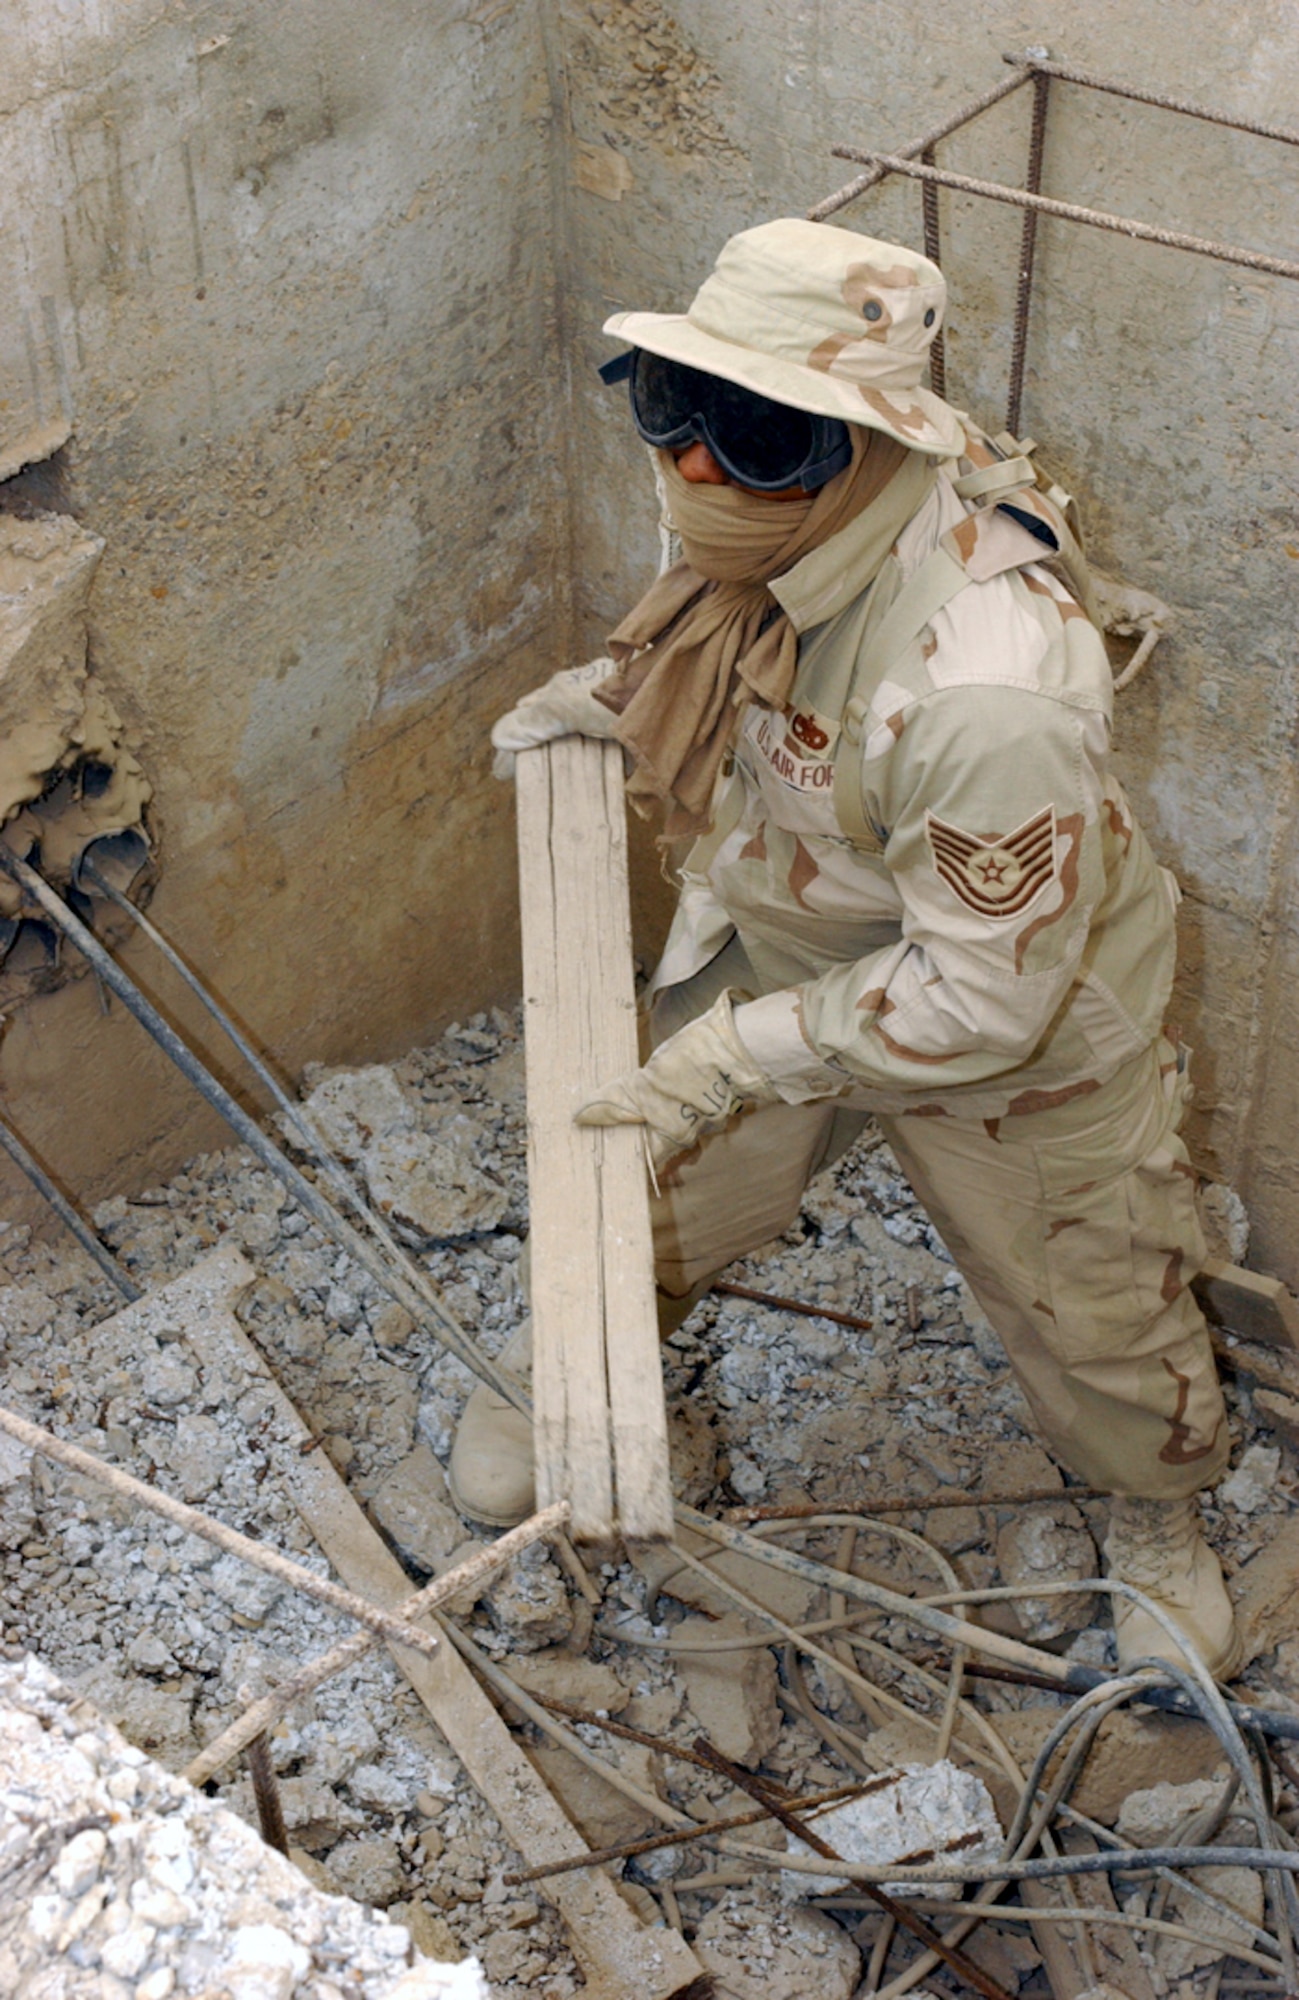 OPERATION IRAQI FREEDOM -- Tech. Sgt. Denny Tankslery clears debris from a collapsed manhole to make way for fiber-optic cable at Tallil Air Base in southern Iraq.  He is assigned to the 5th Combat Communications Group from Robins Air Force Base, Ga.  (U.S. Air Force photo by Master Sgt. Terry L. Blevins)